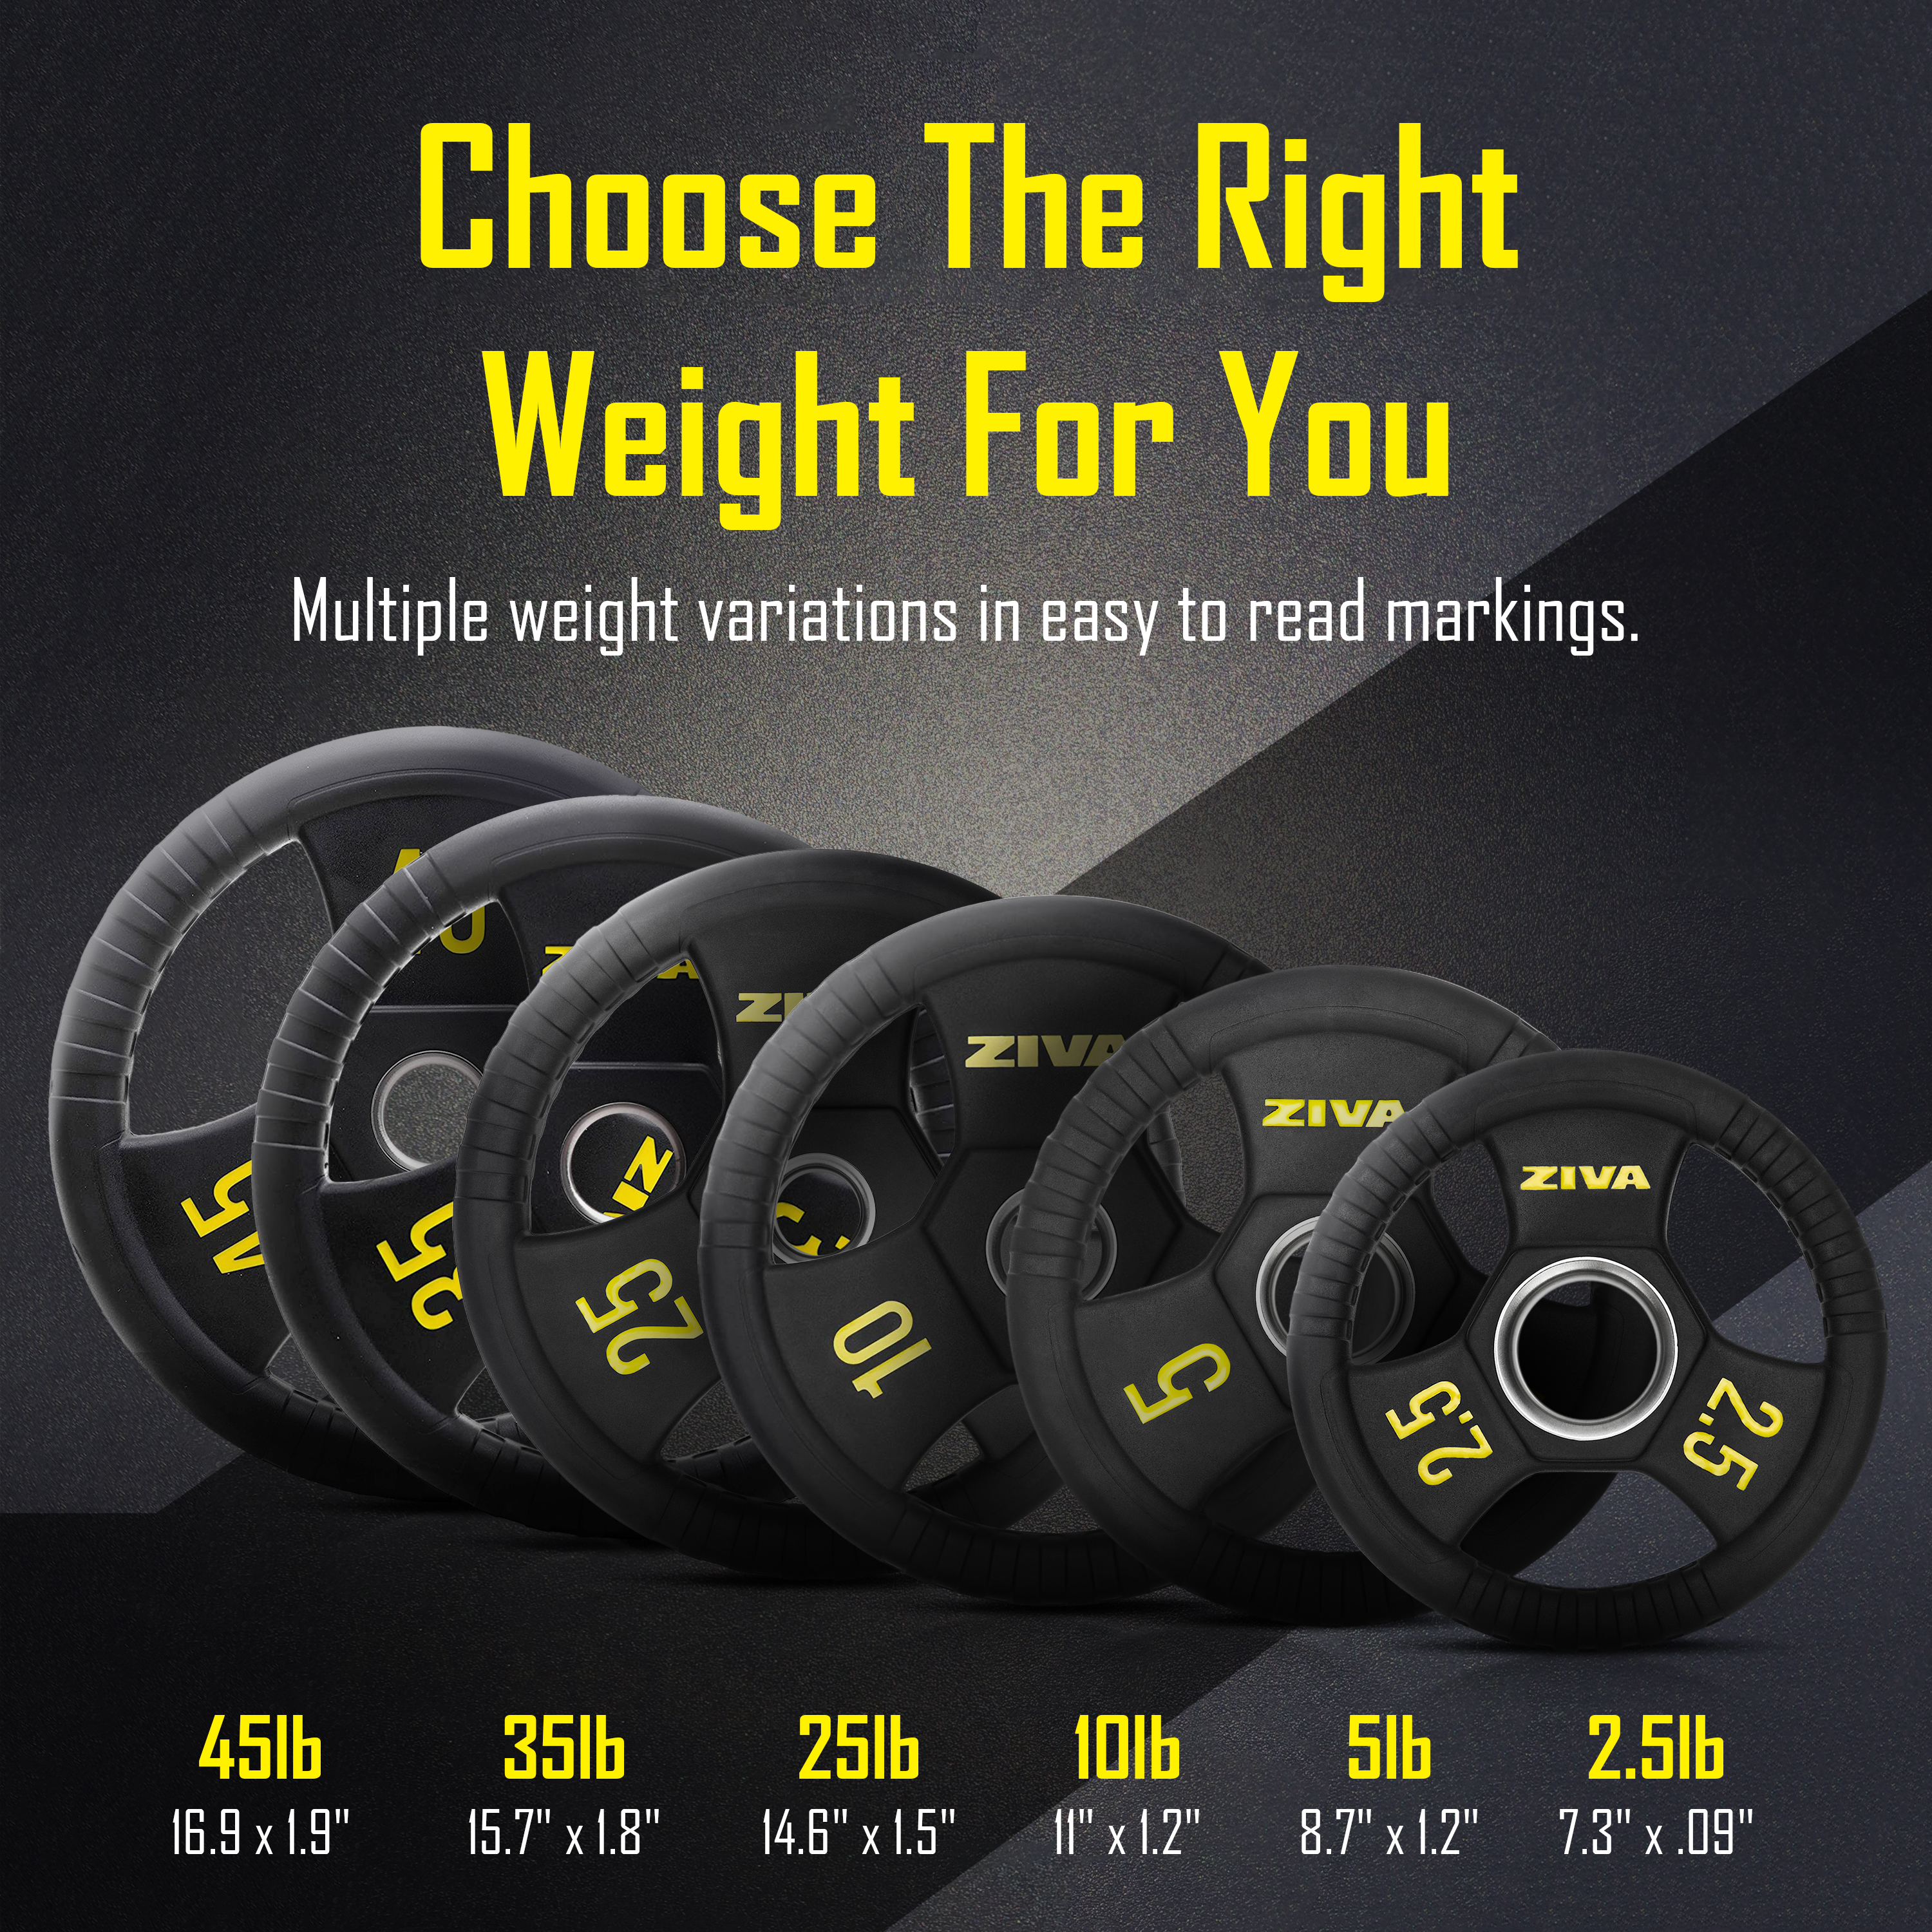 Choose the right weight for you. Multiple weight variations in easy to read markings. 45lb, 35lb, 25lb, 10lb, 5lb, 2.5lb